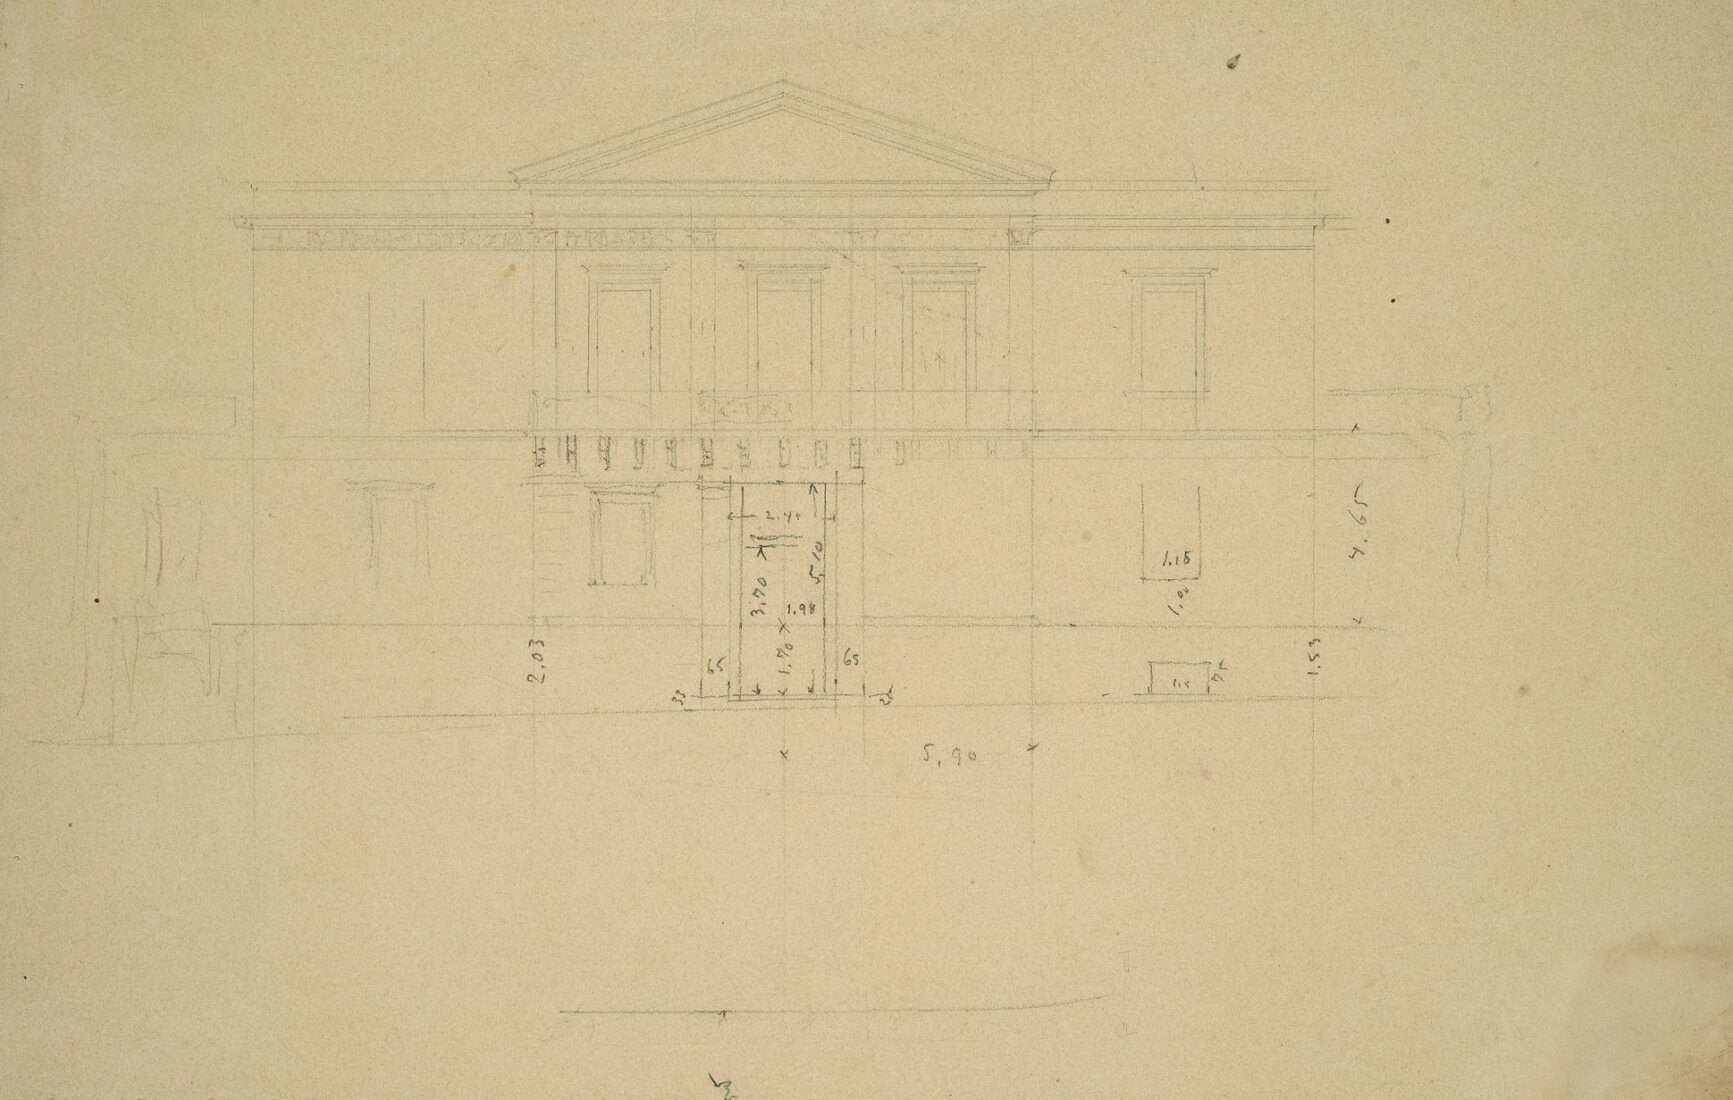 Amvrosios Rallis’ s Mansion in Klafthmonos Square [demolished in 1938]. Rendering of Architect Stamatis Kleanthis’s Building (1836 or 1837)
for the Addition of an Interior Staircase - Ziller Ernst